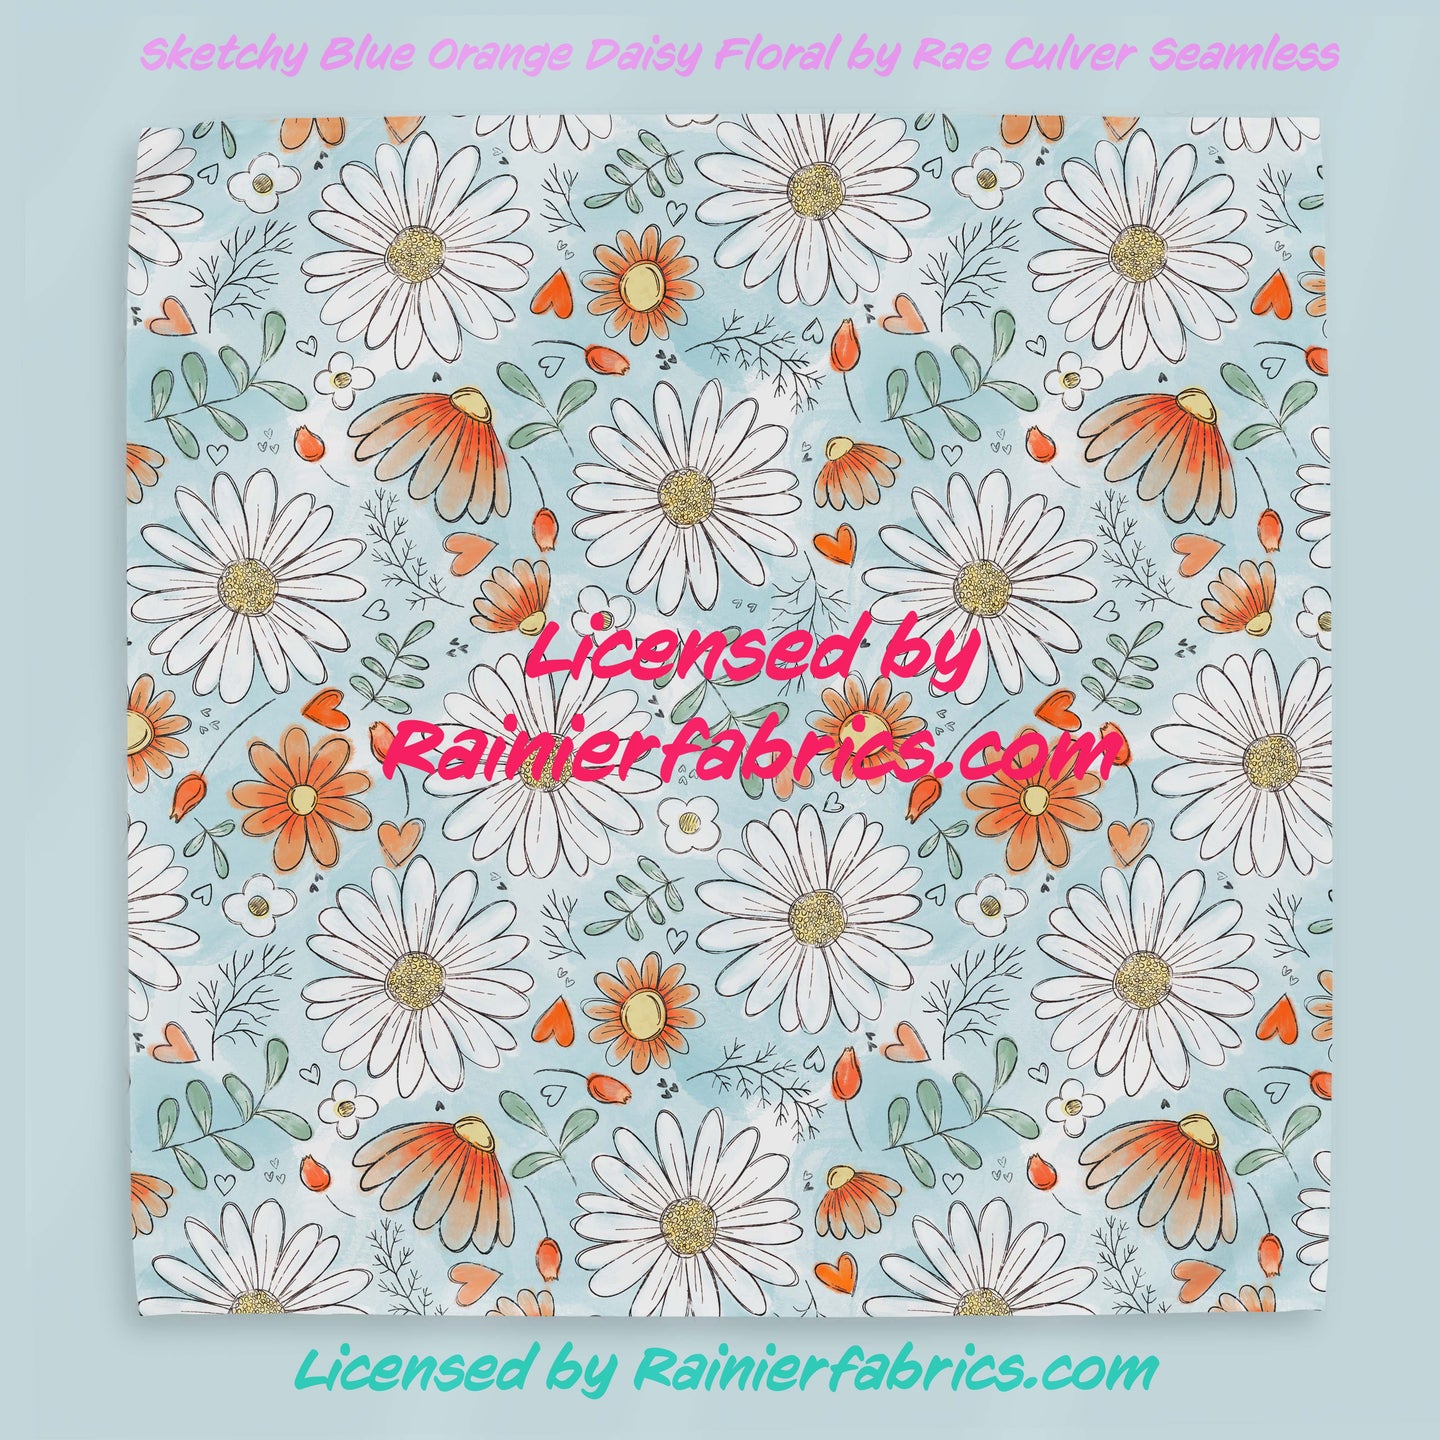 Sketchy Daisies with Options including RWB by Rae Culver Seamless - 2-5 business days to ship - Order by 1/2 yard